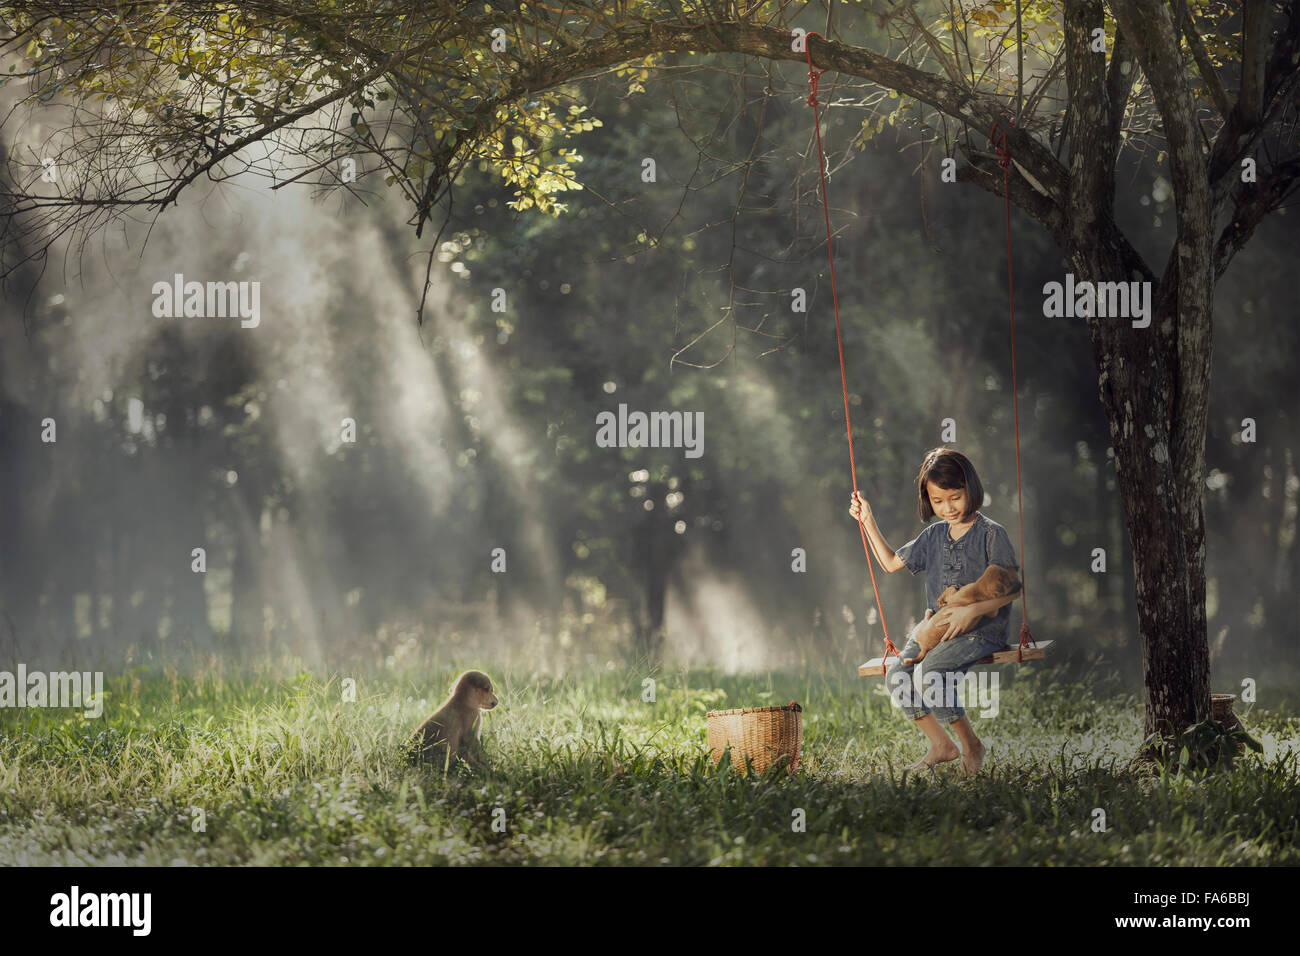 Girl sitting on swing avec son chien Banque D'Images